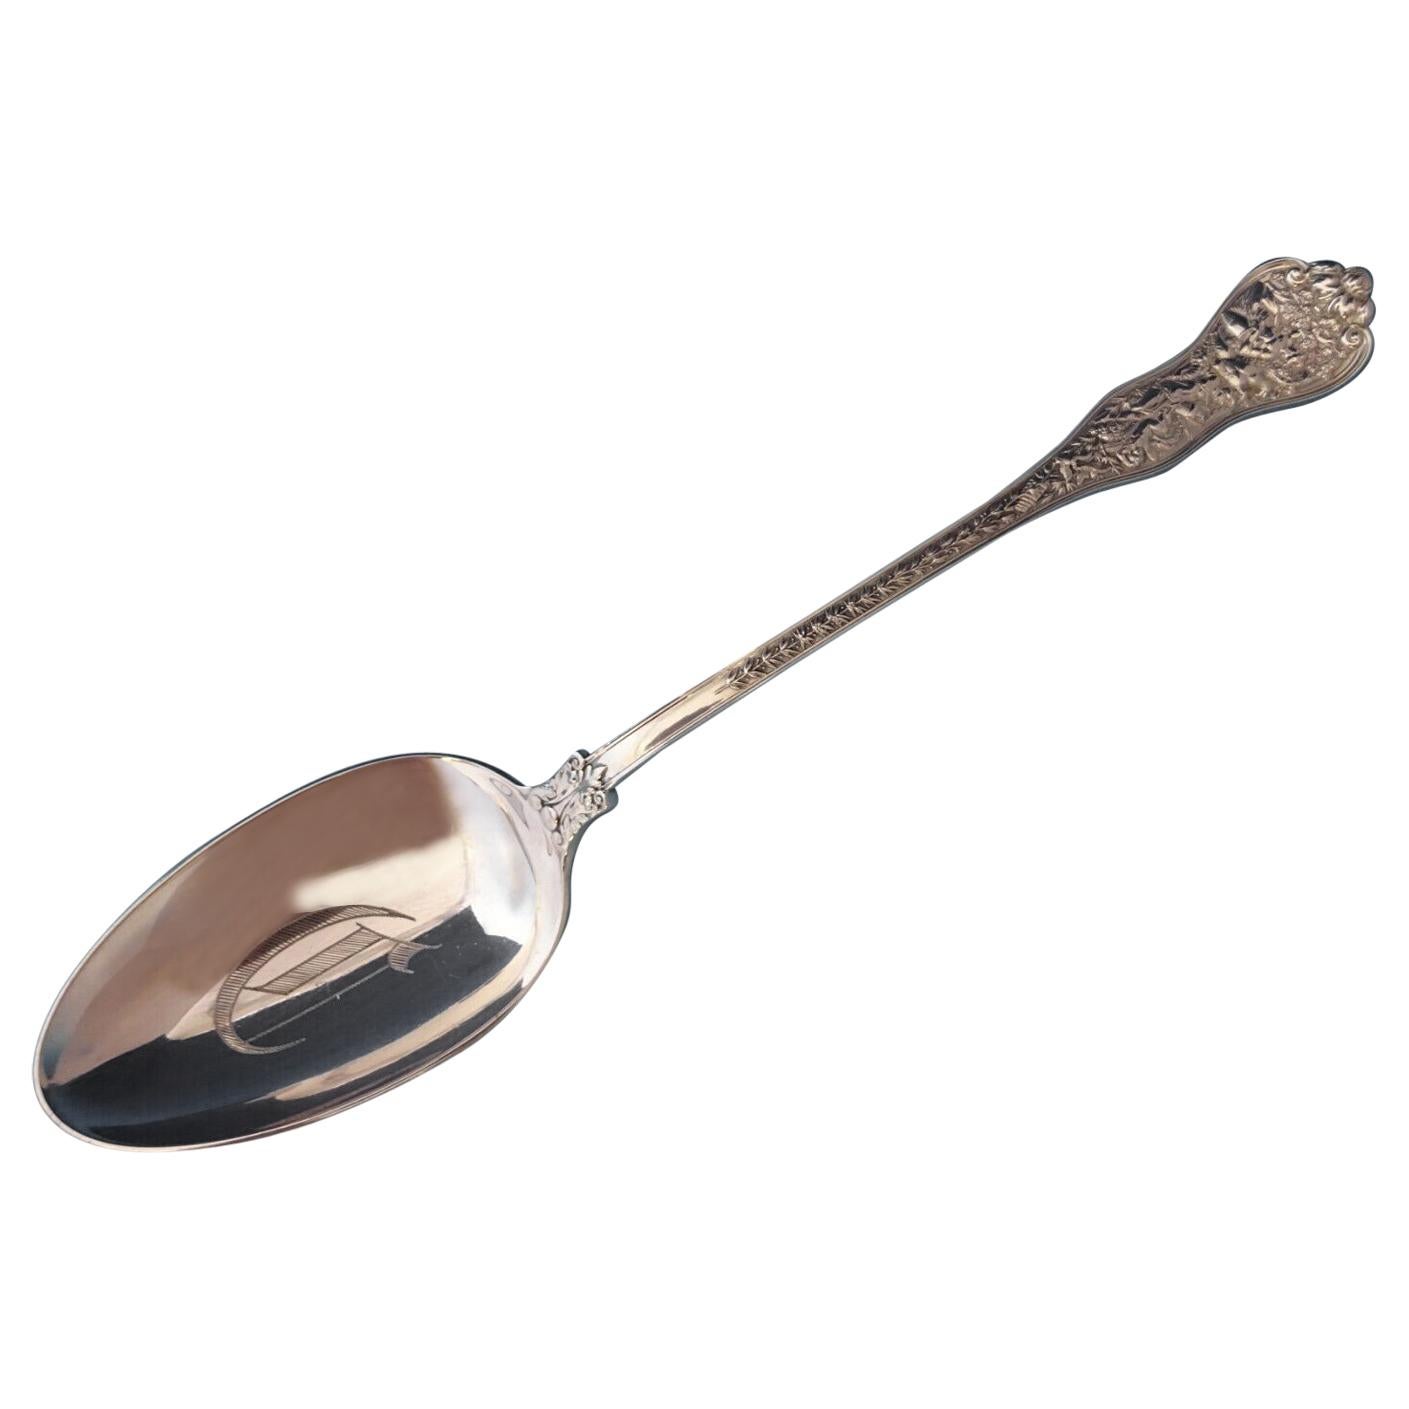 Olympian by Tiffany Sterling Silver Stuffing Spoon with Button C Monogram